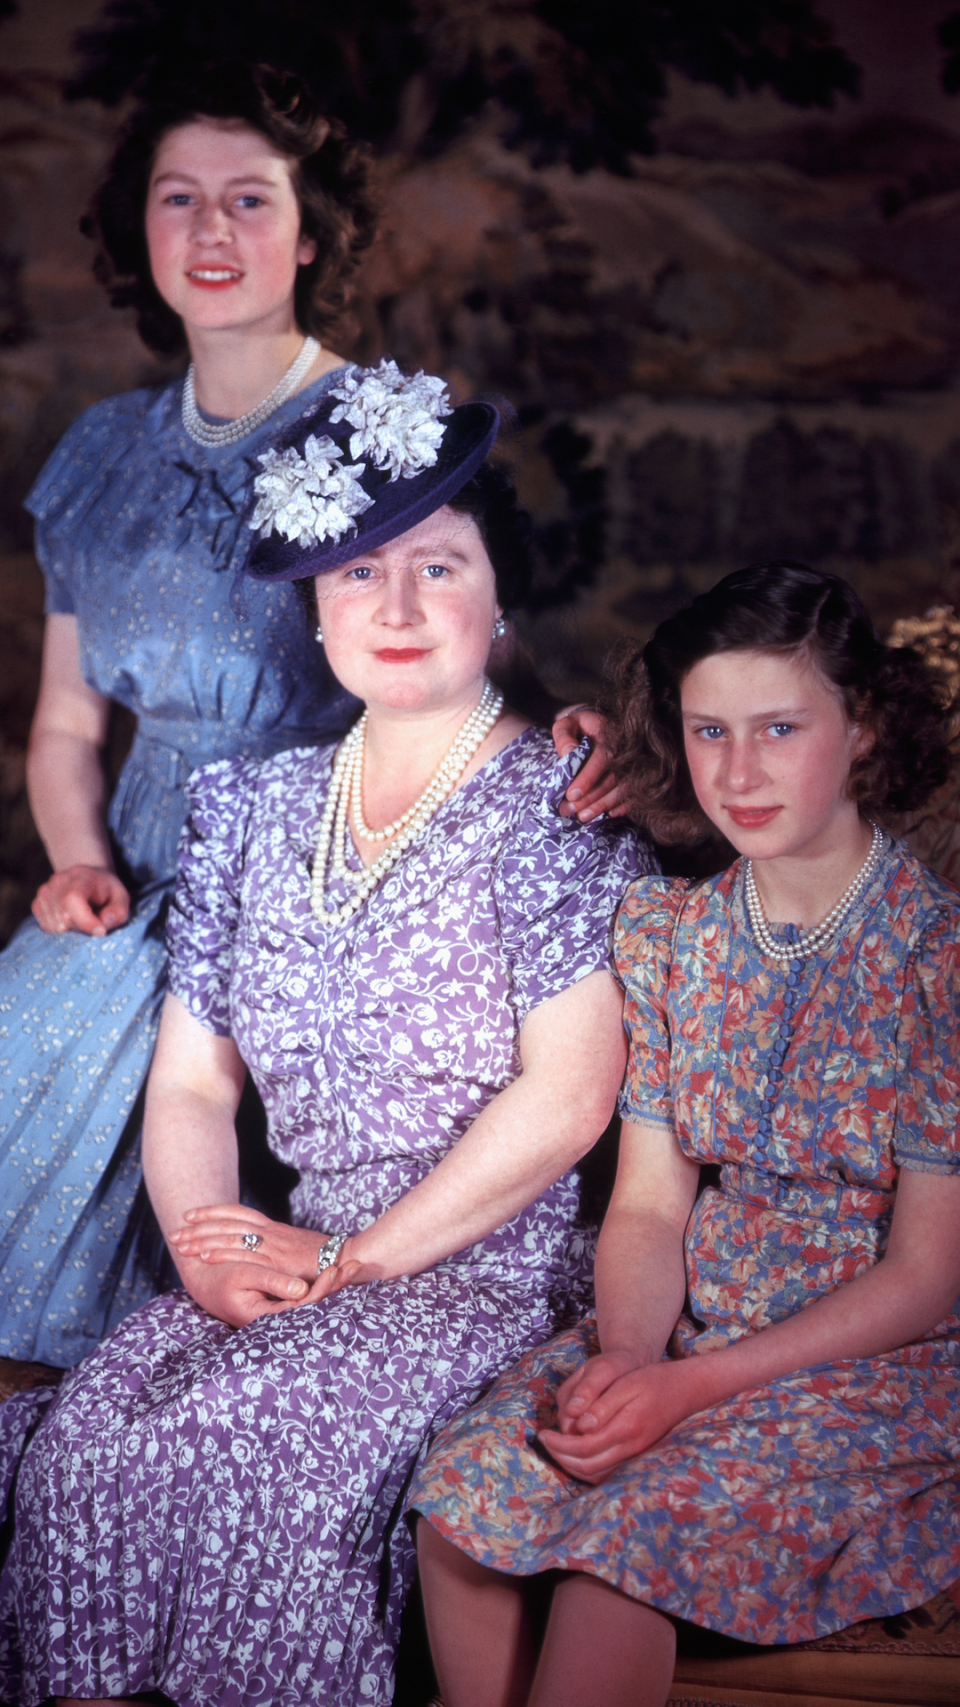 <p> A year before the end of the Second World War in 1944, the royal princesses sat for a portrait with the Queen Mother. The teenagers appeared to be following in her footsteps with a penchant for tea dresses and pearls - a look they both continued to embrace for decades to come. </p>